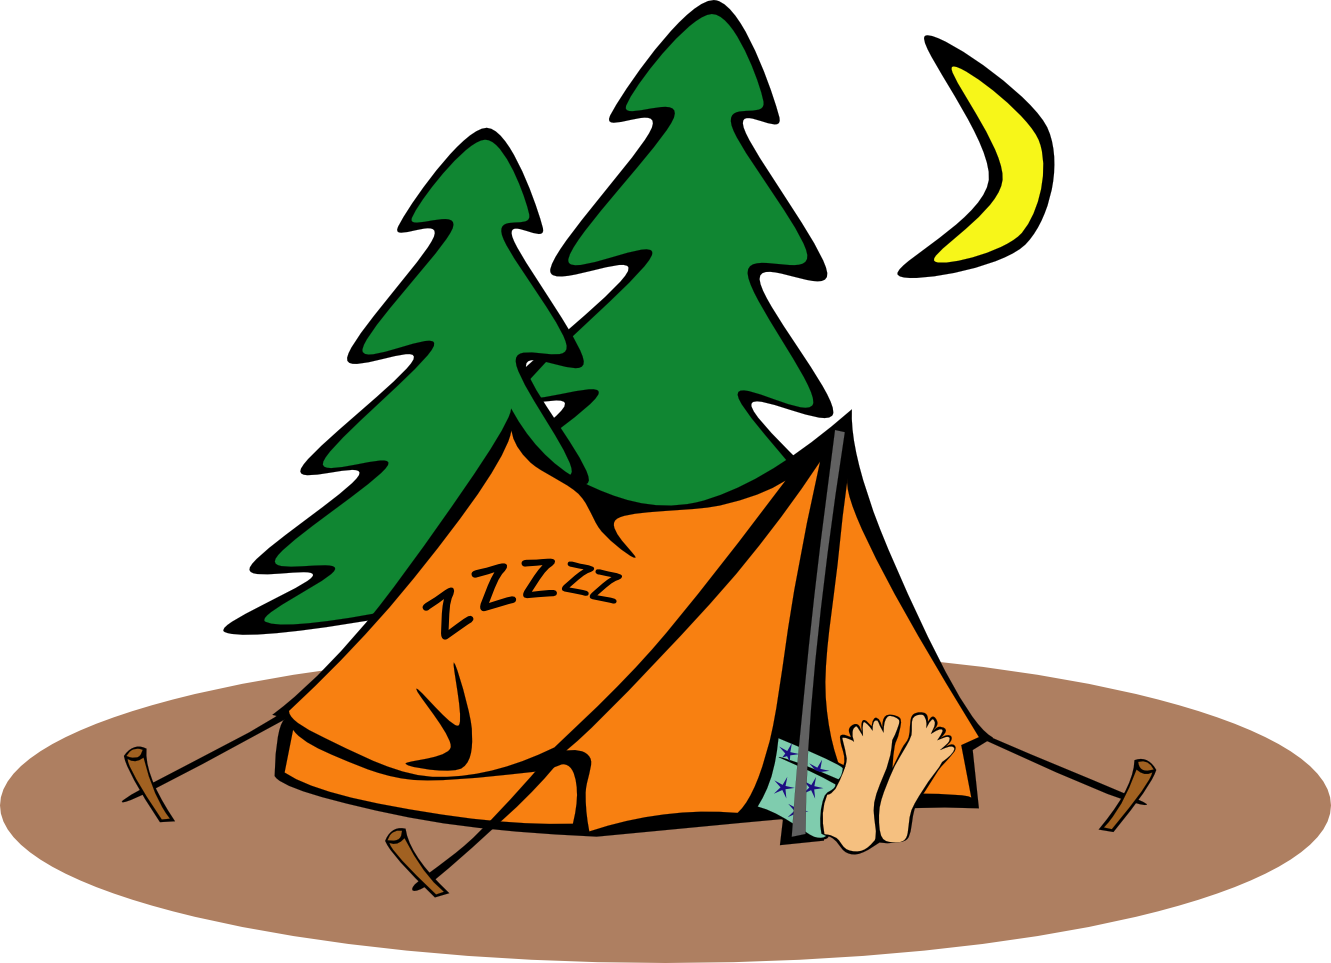 A Cartoon Of A Tent With Trees And A Moon